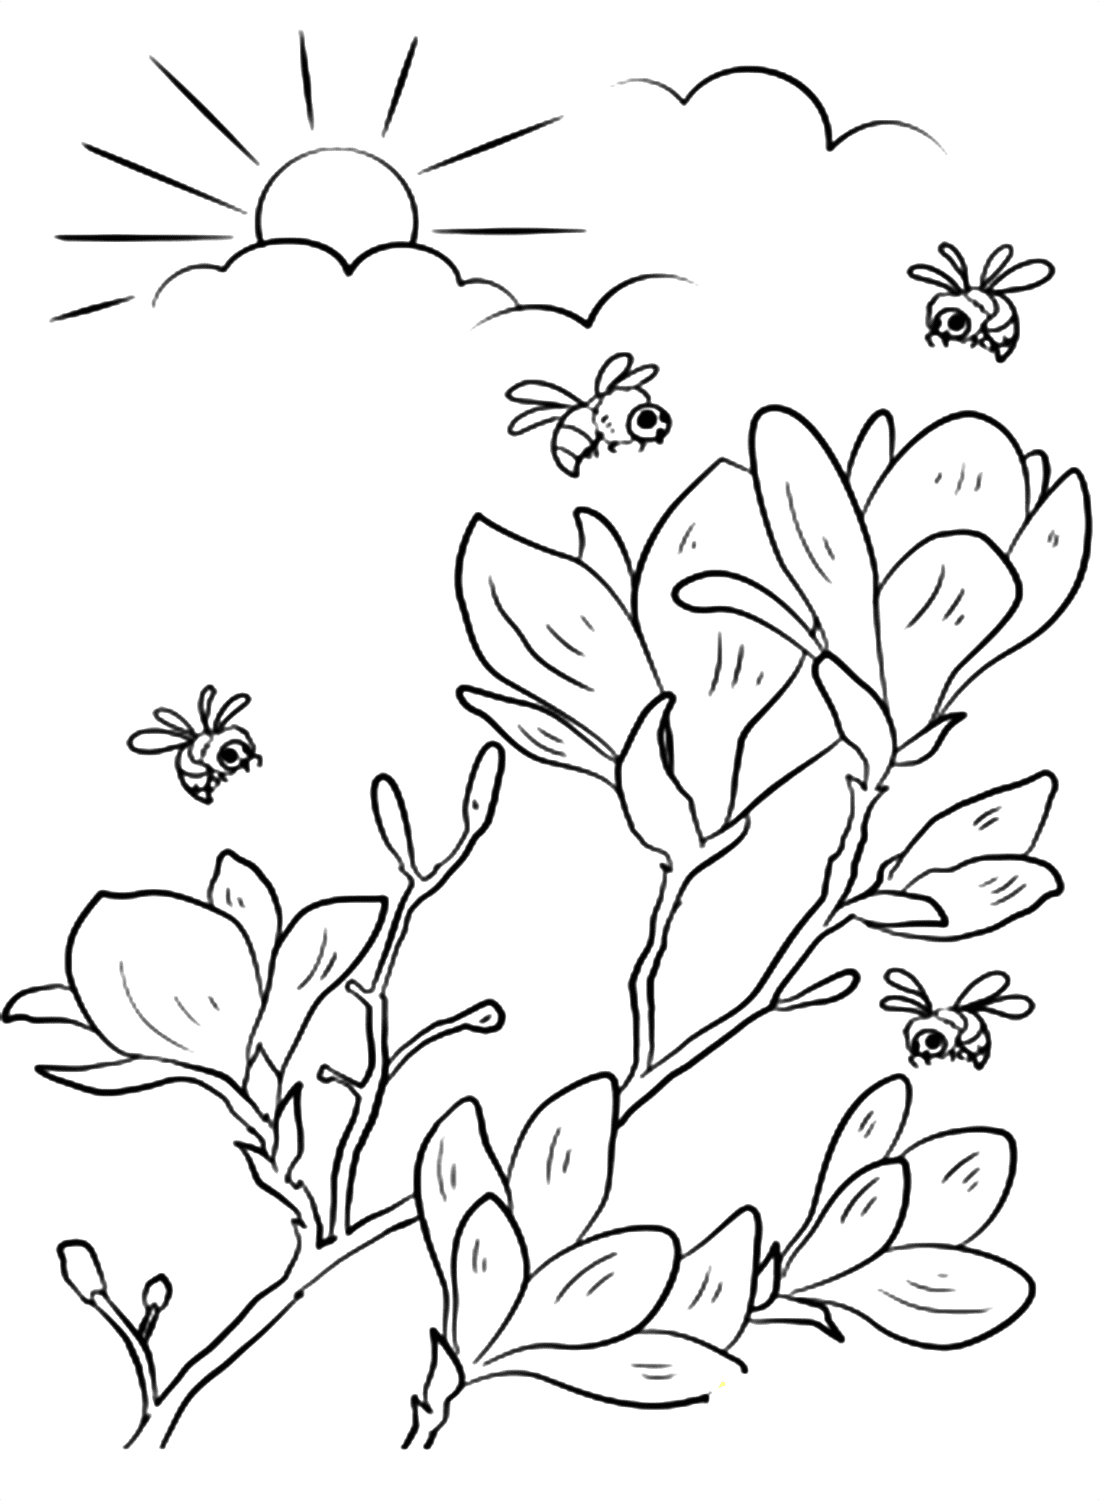 Flowering Branches to Bloom Coloring Page